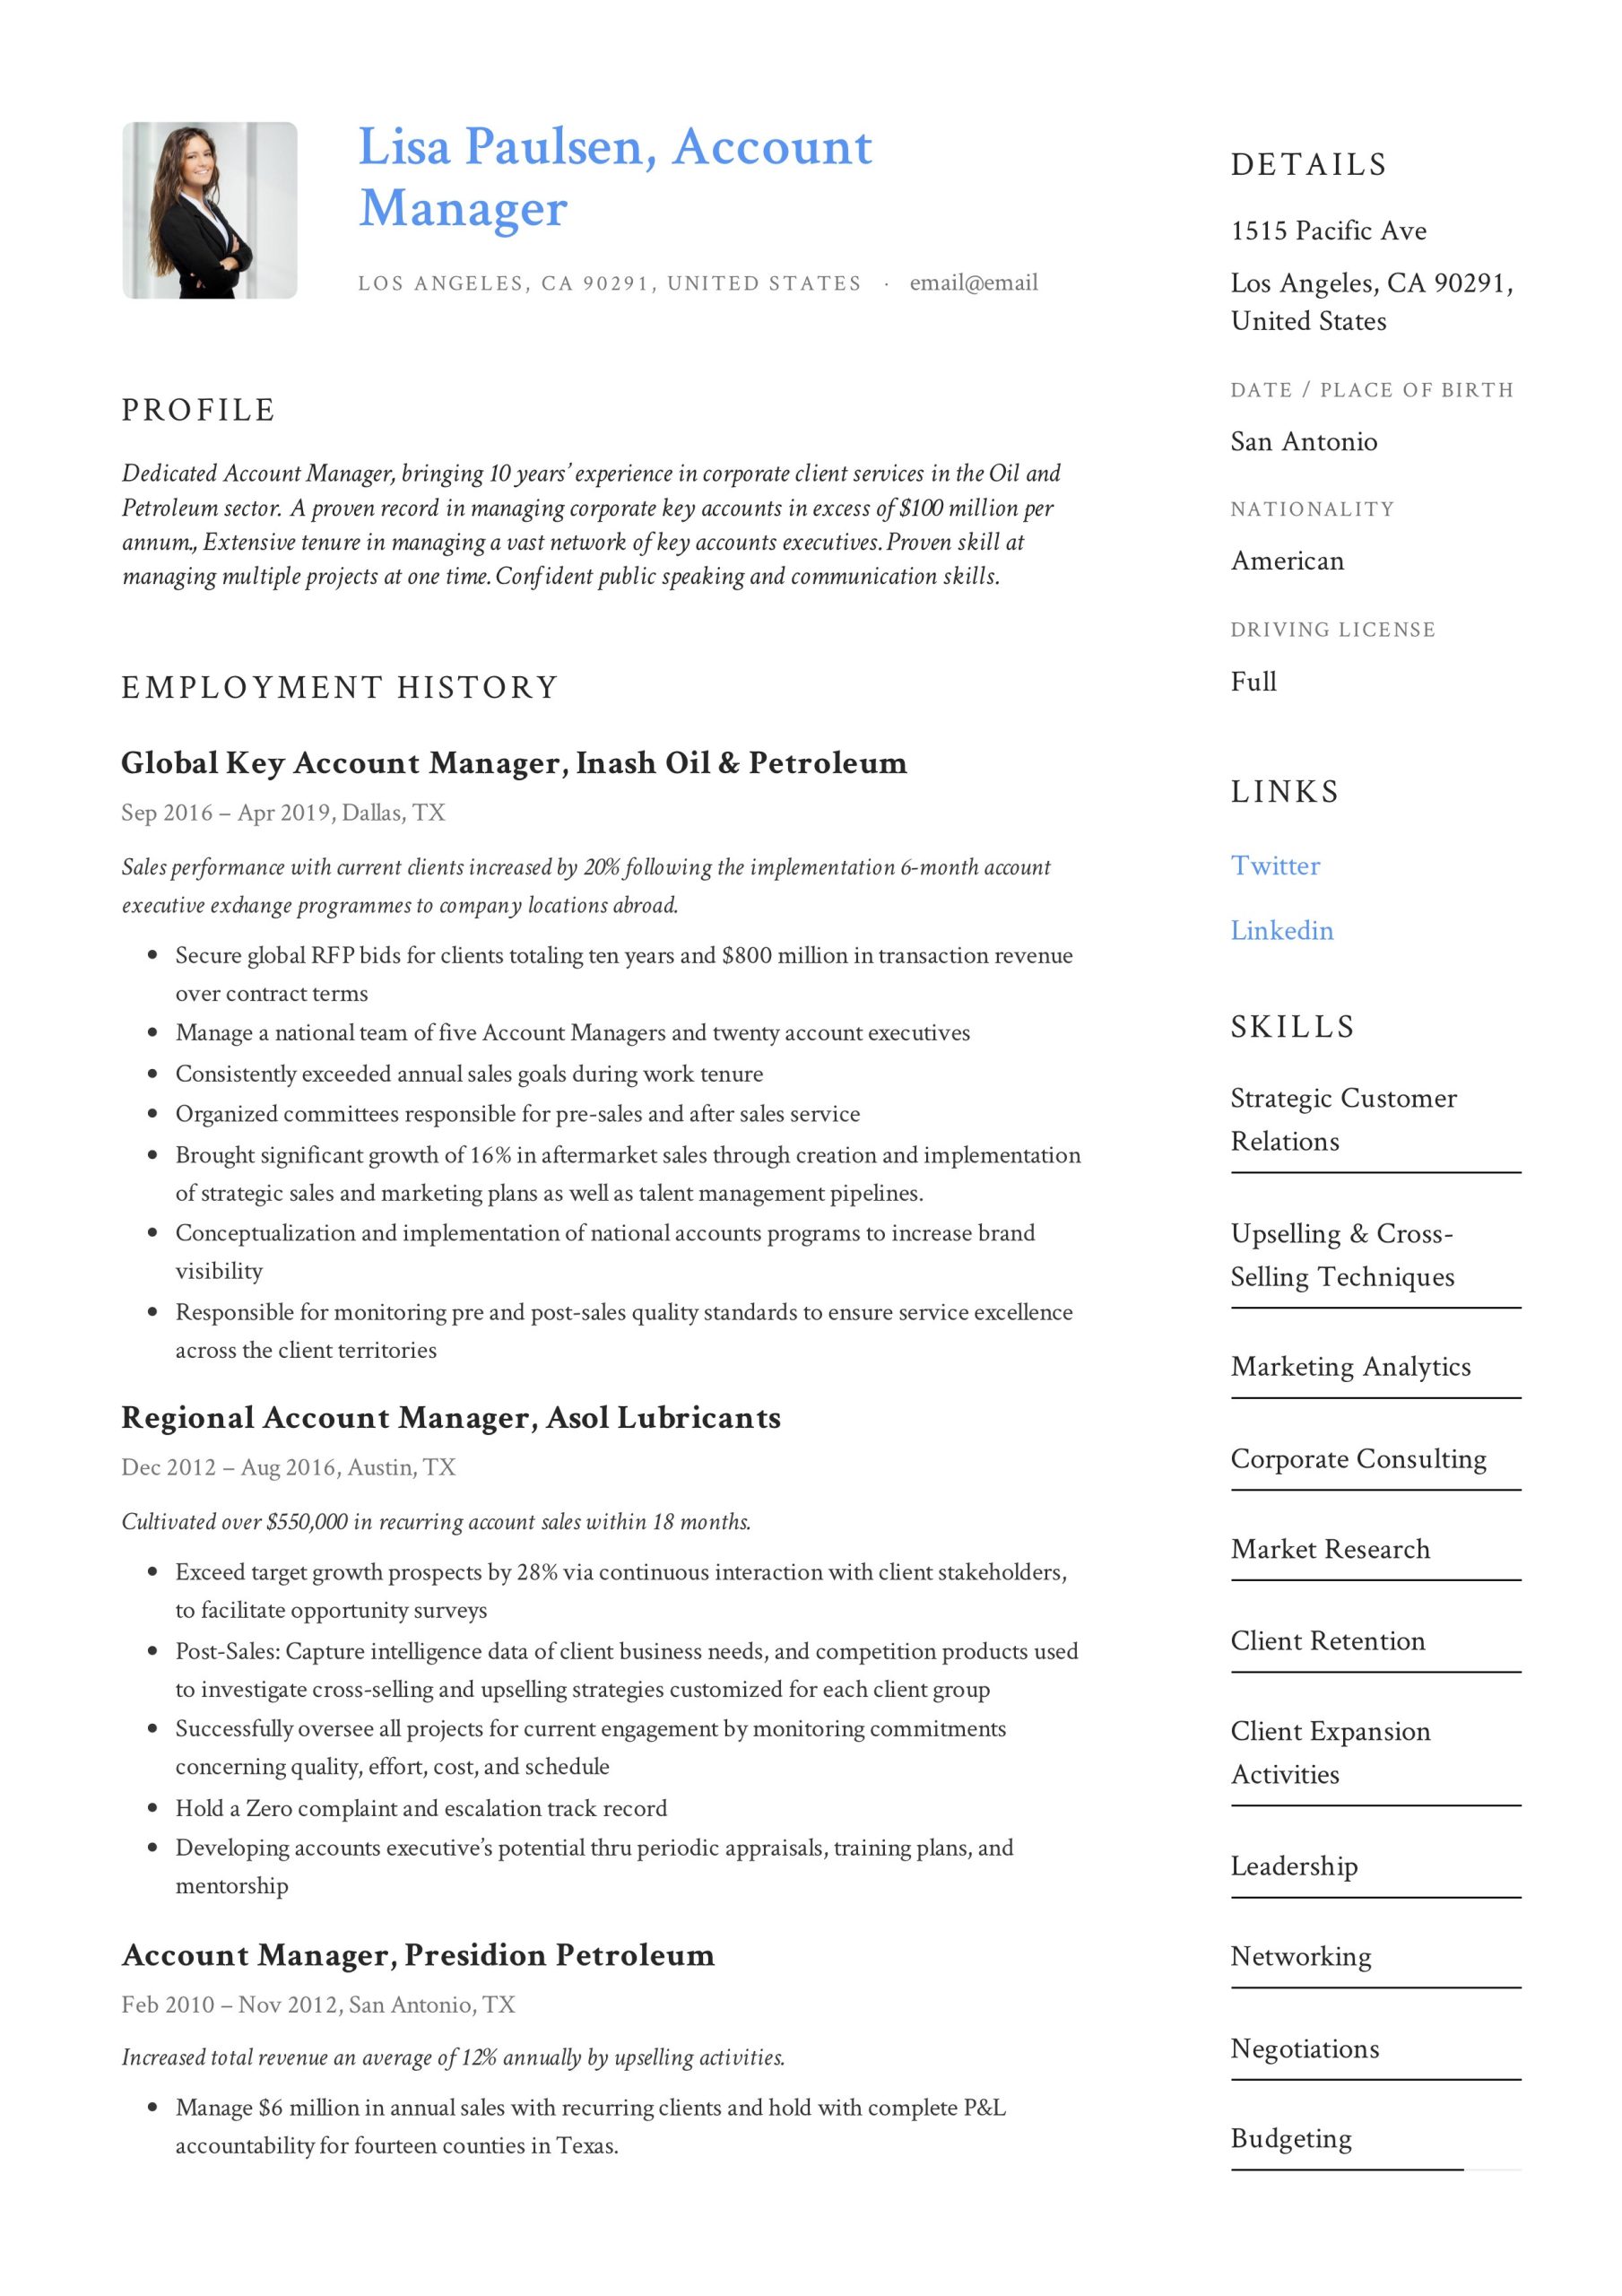 Sample Resume for Account Manager Position Account Manager Resume & Writing Guide